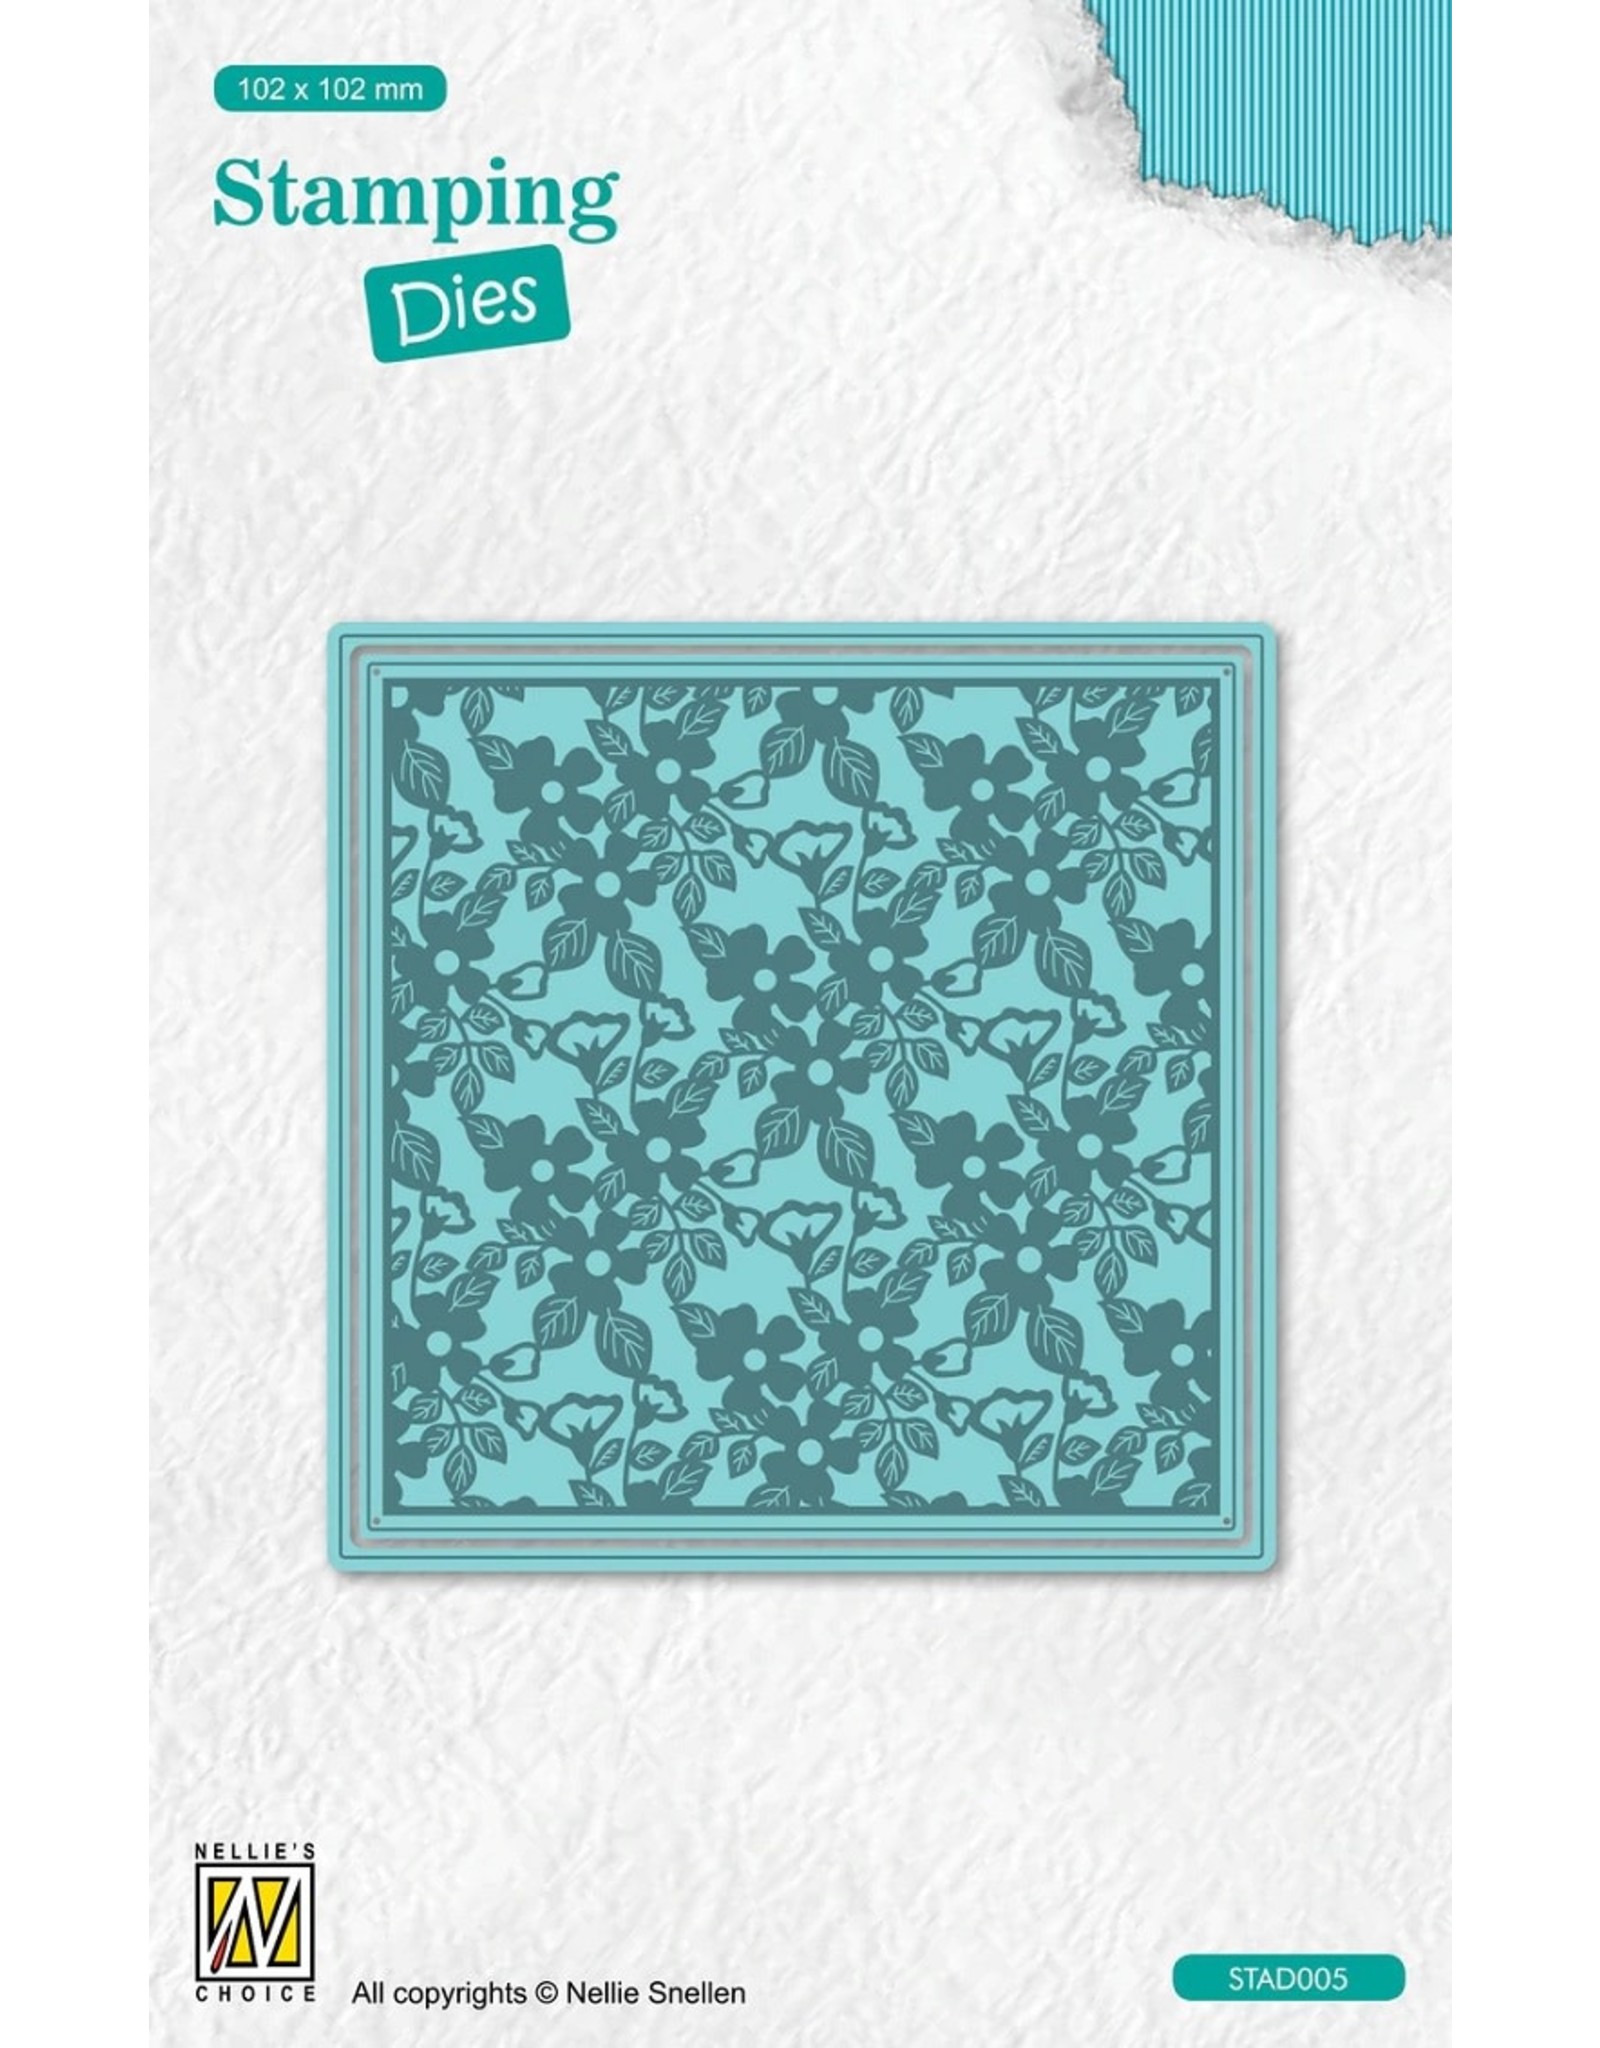 Nellie's Stamping Die Square - Flowers